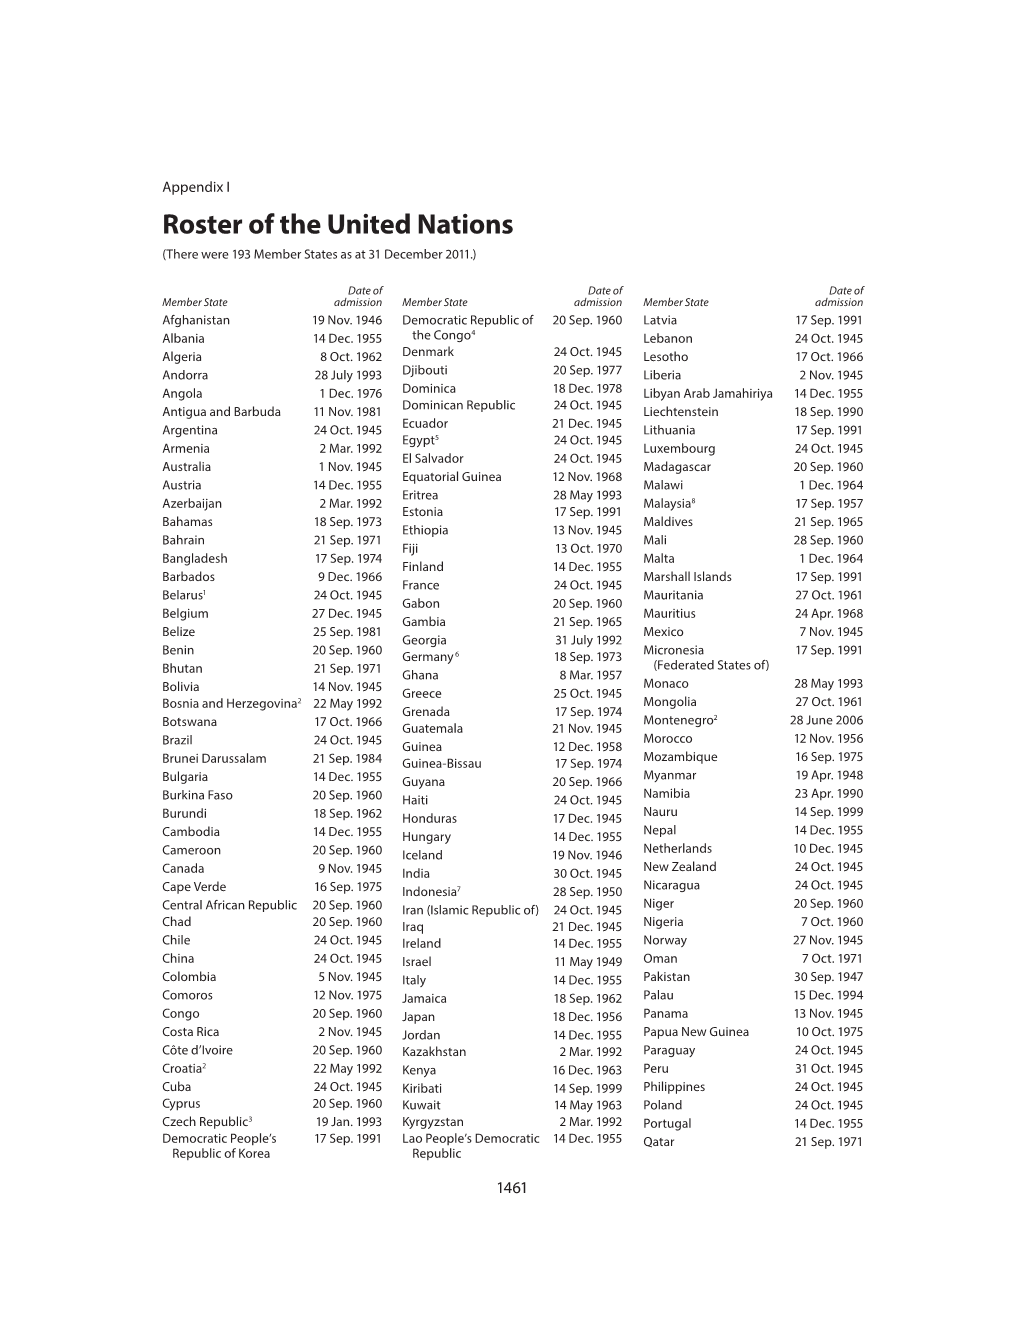 Roster of the United Nations (There Were 193 Member States As at 31 December 2011.)